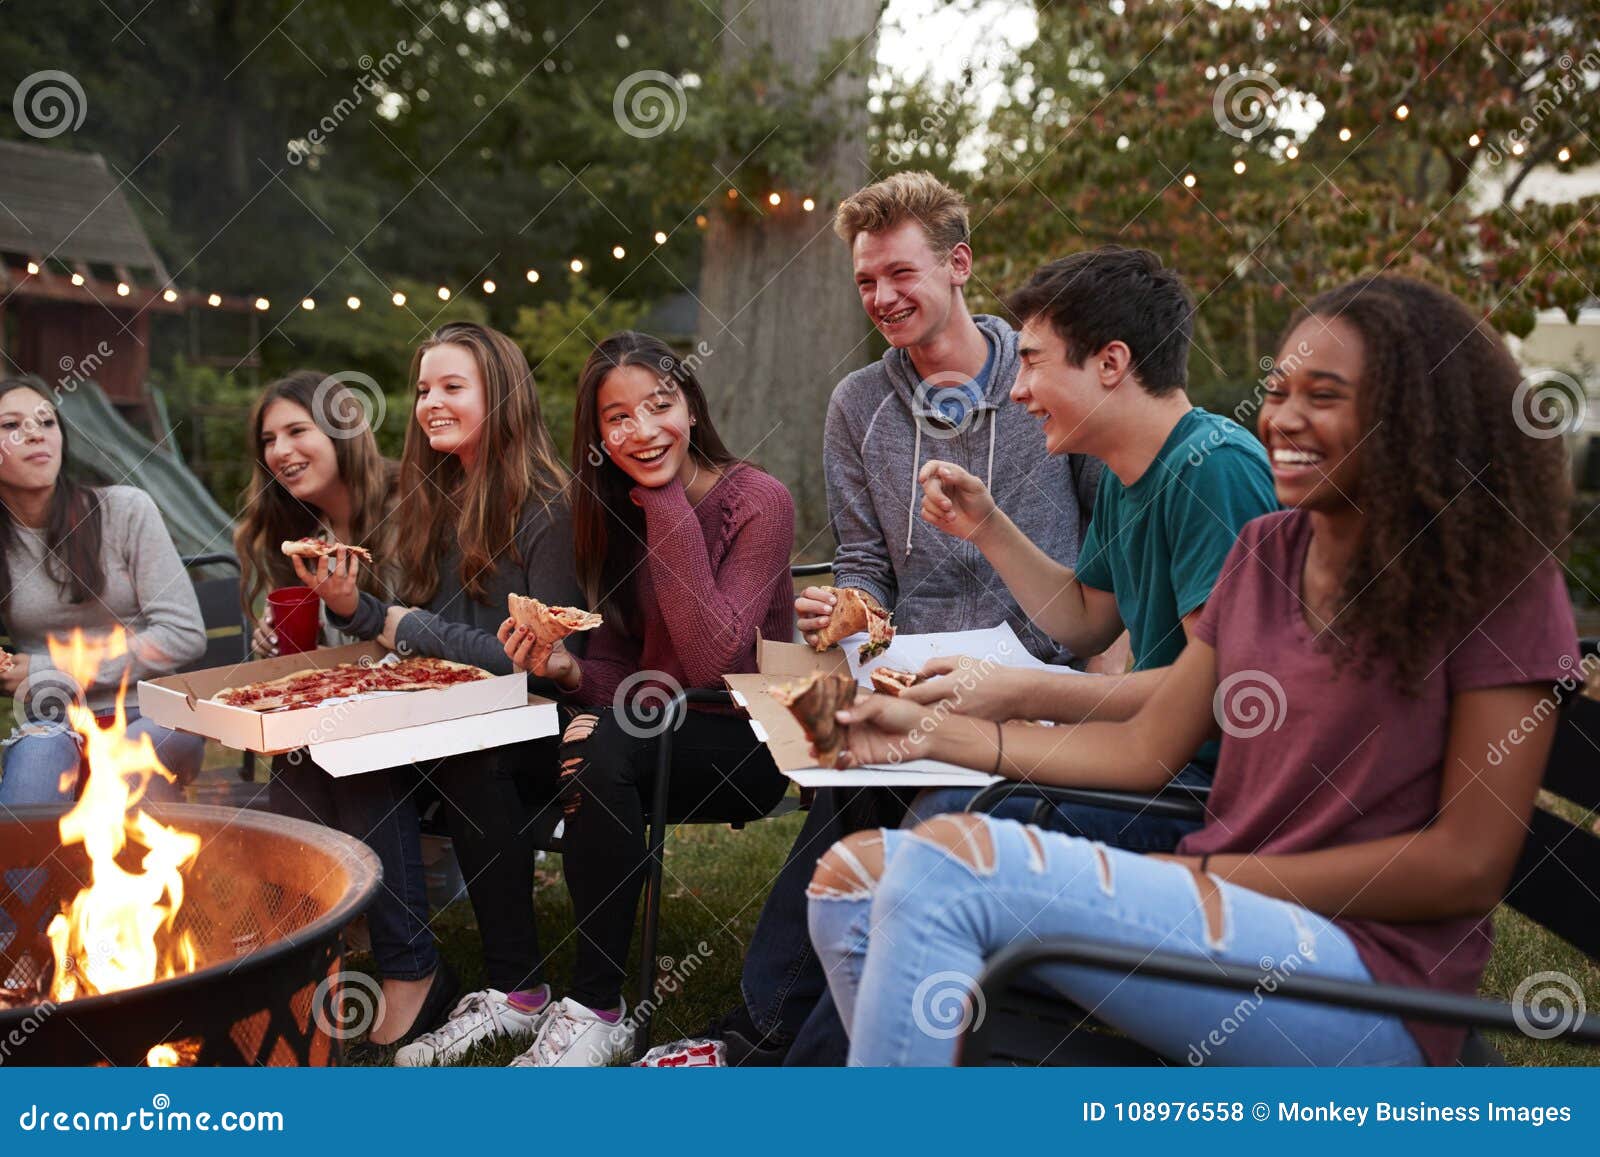 teenagers at a fire pit eating take-away pizzas, close up